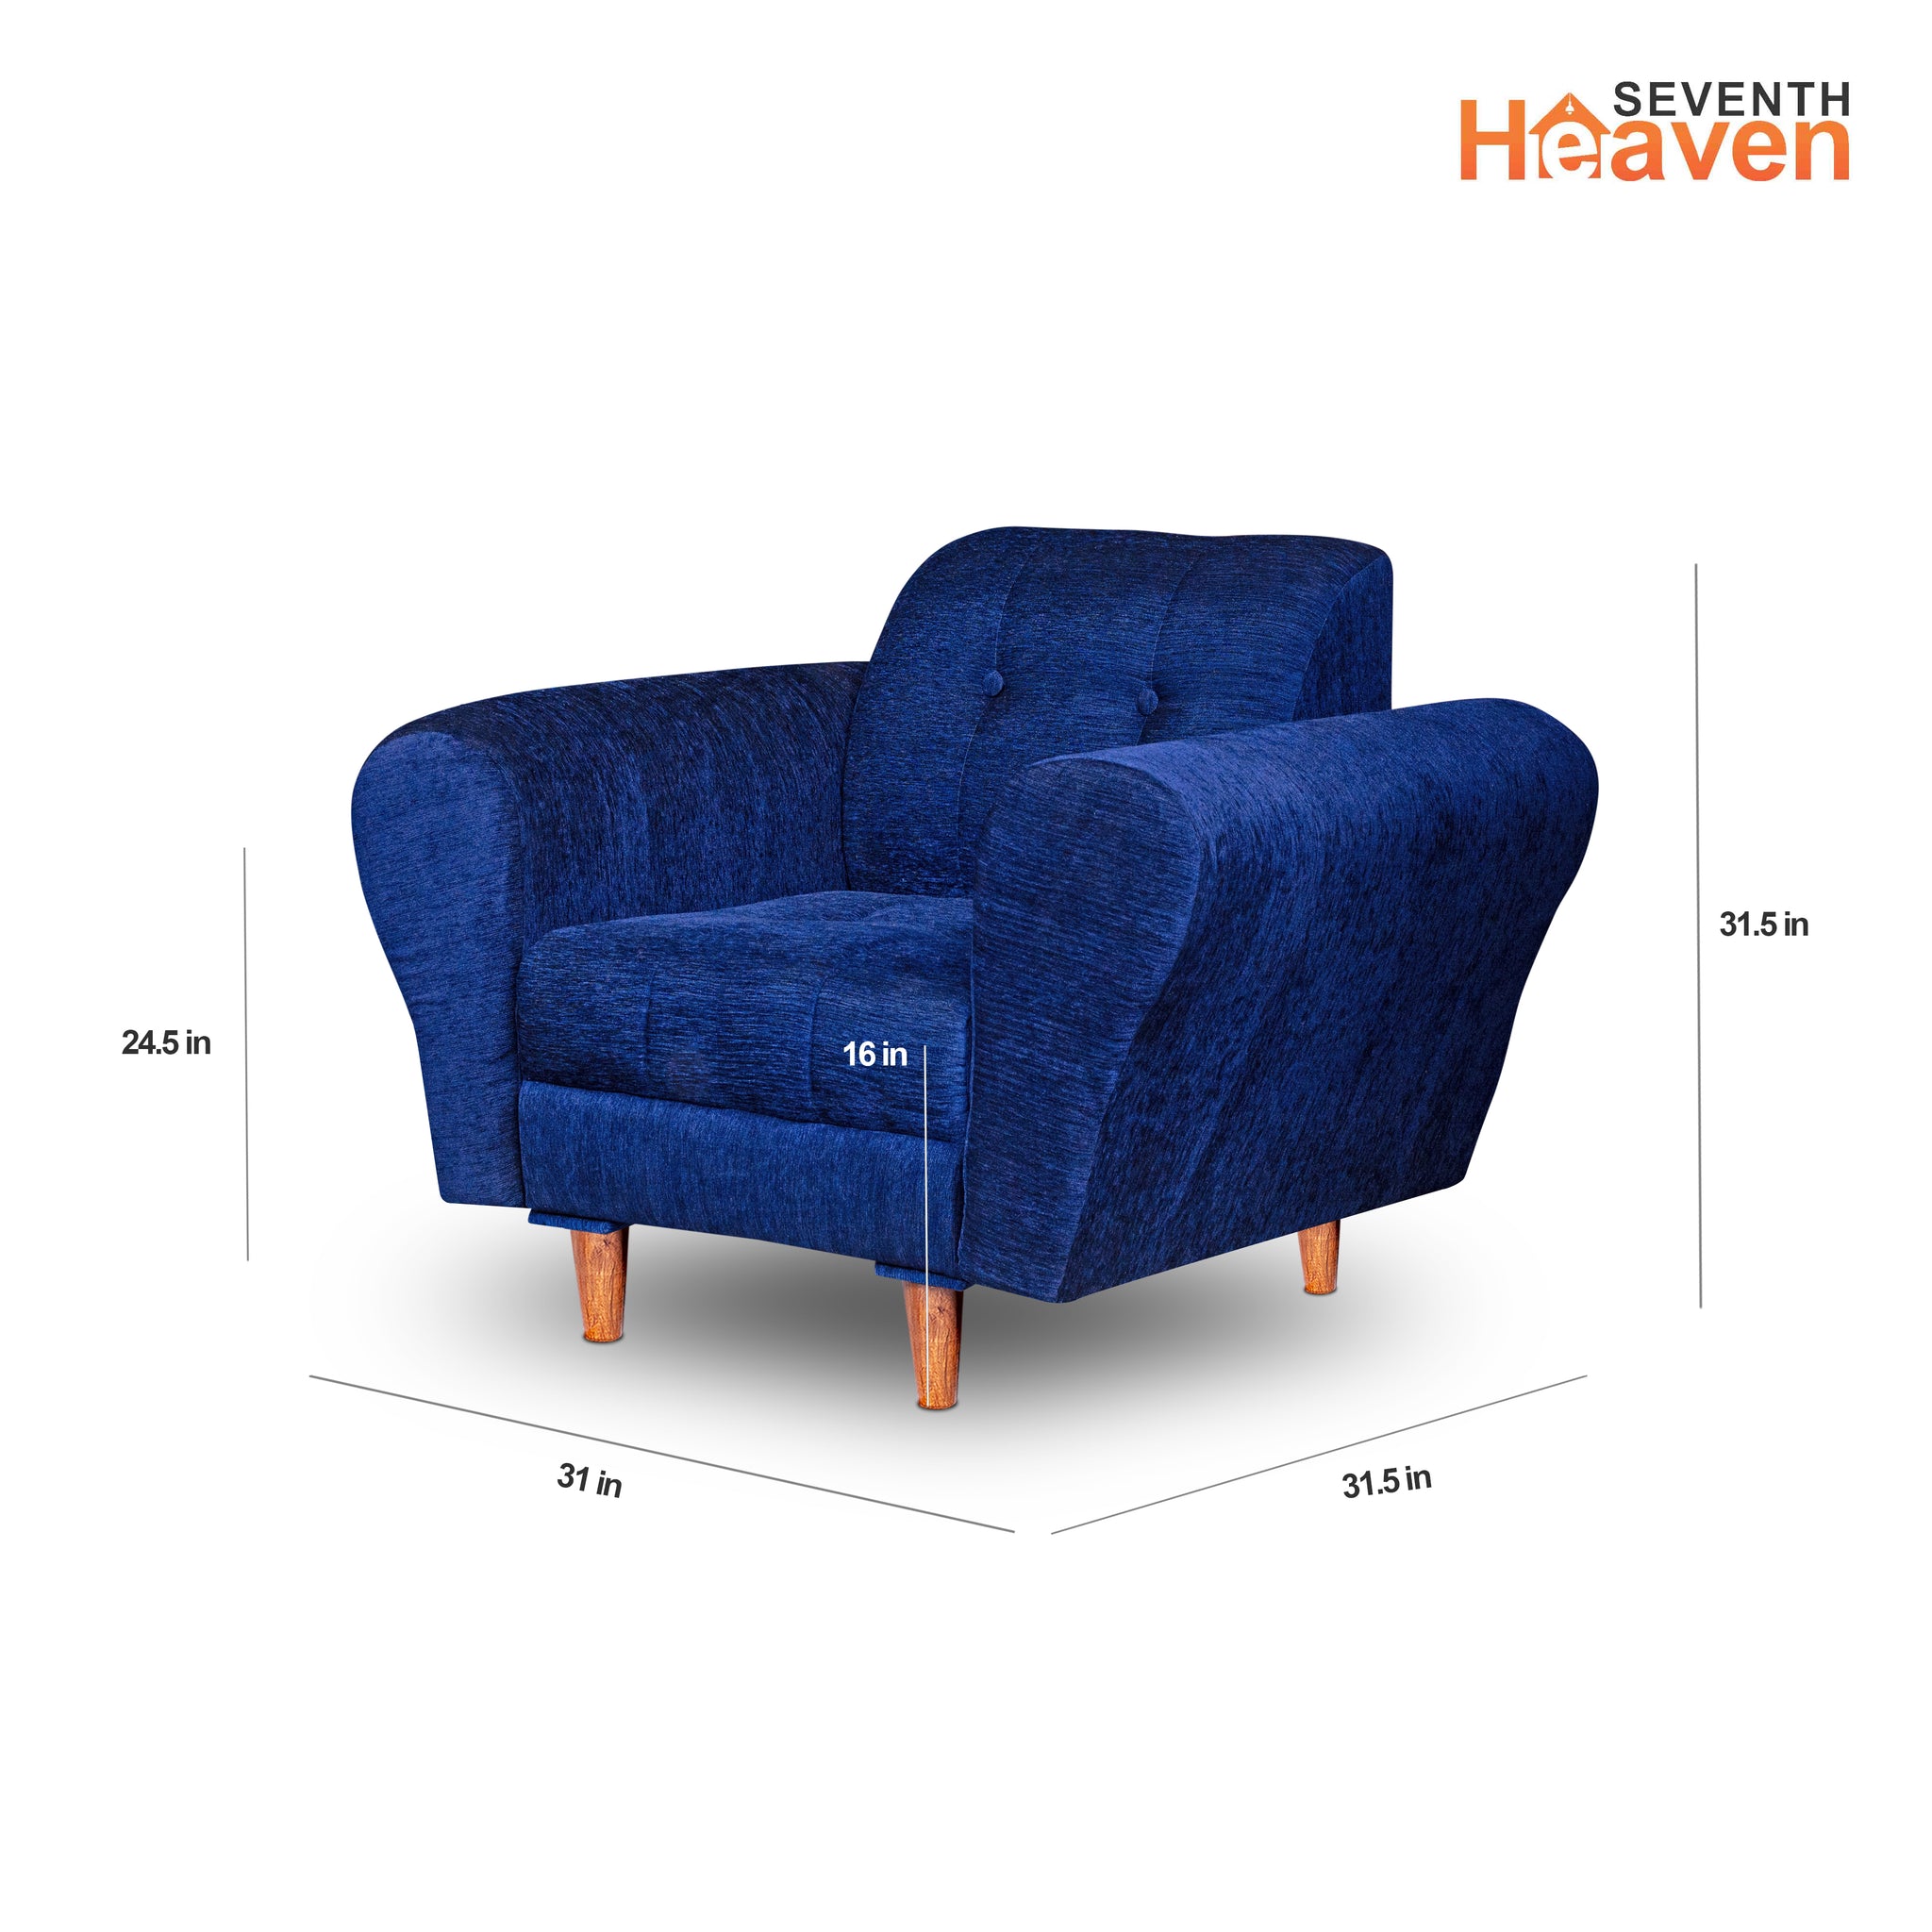 Seventh Heaven Milan 1 Seater Wooden Sofa Set Modern & Elegant Smart Furniture Range for luxurious homes, living rooms and offices. Blue Colour Molphino fabric with sheesham polished wooden legs.Product dimensions are also mentioned.